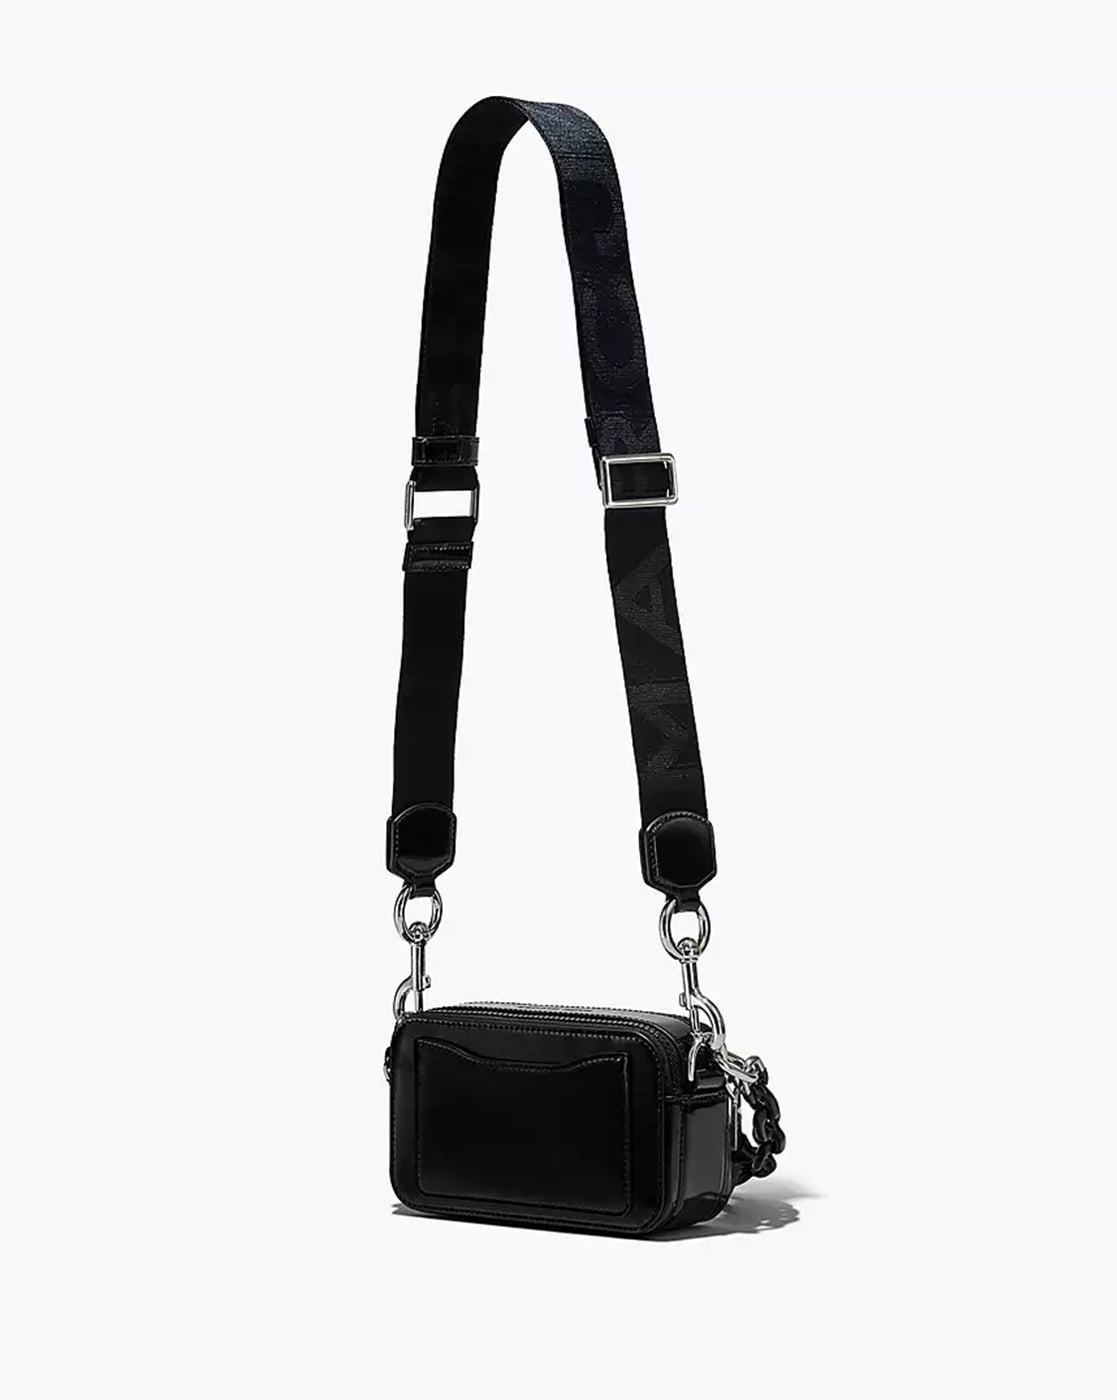 MARC JACOBS: The Snapshot bag in saffiano leather - Black  Marc Jacobs  crossbody bags H121L01PF21 online at